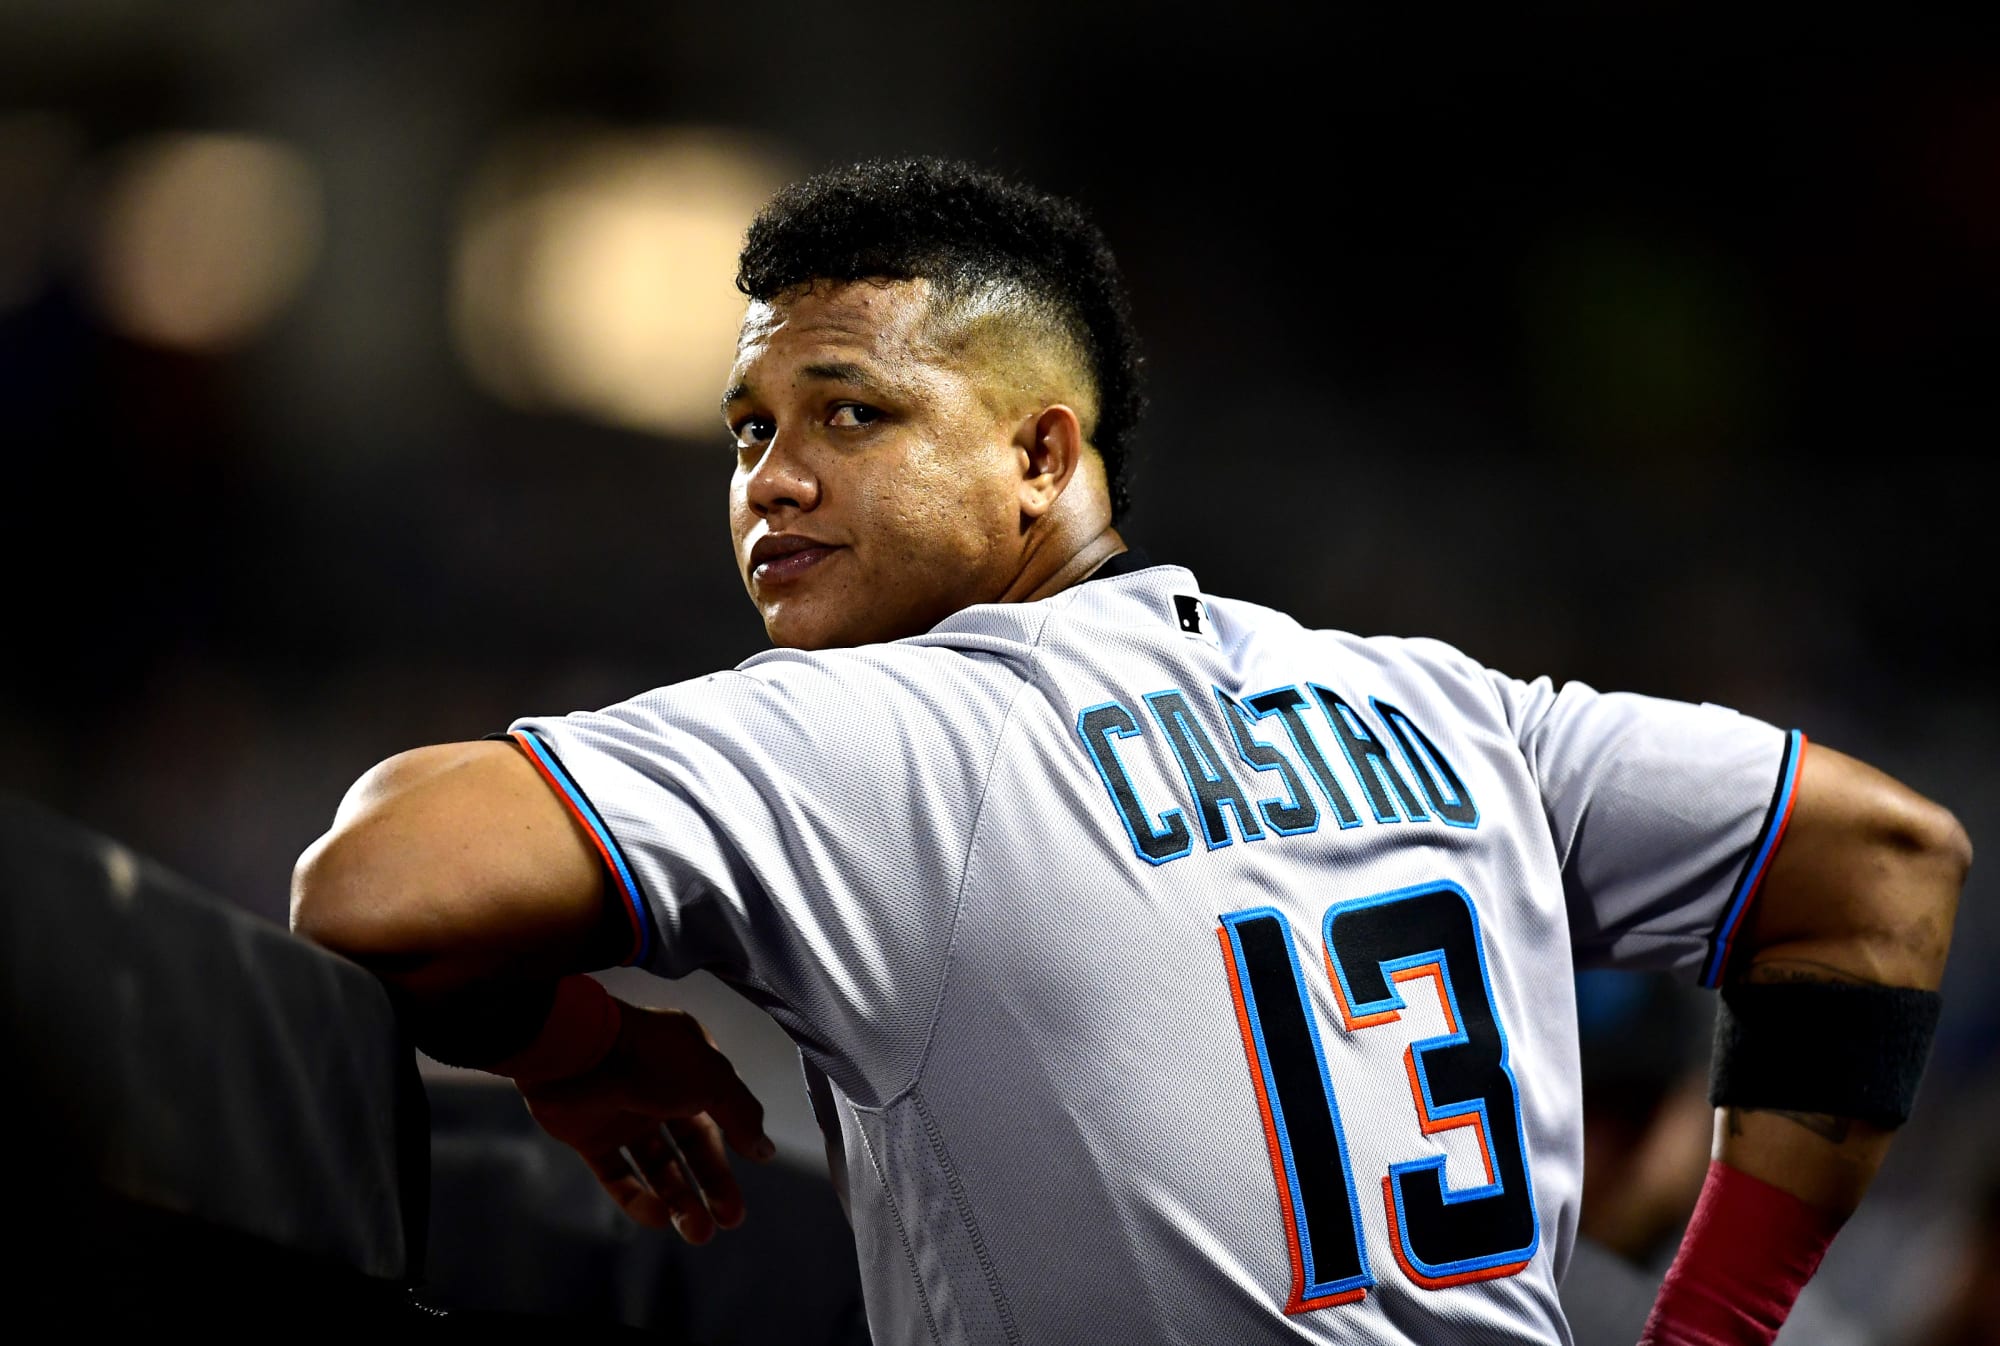 Starlin Castro wins it for Yankees